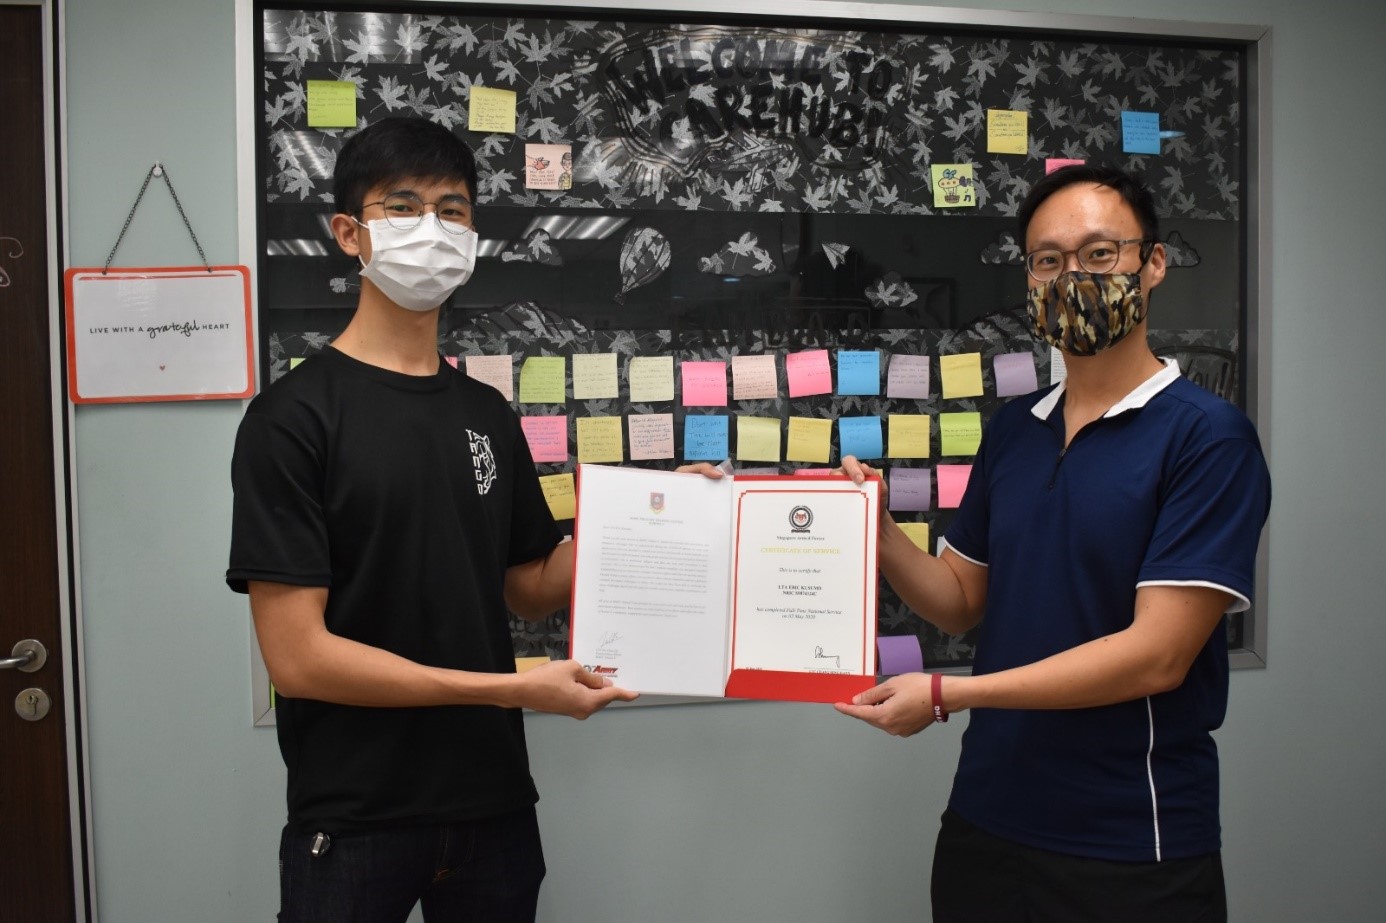 LTC Teo Chun Jin (right) presenting the ORD certificate to one of the NSF officers who has extended his service for three months to help out during COVID-19.